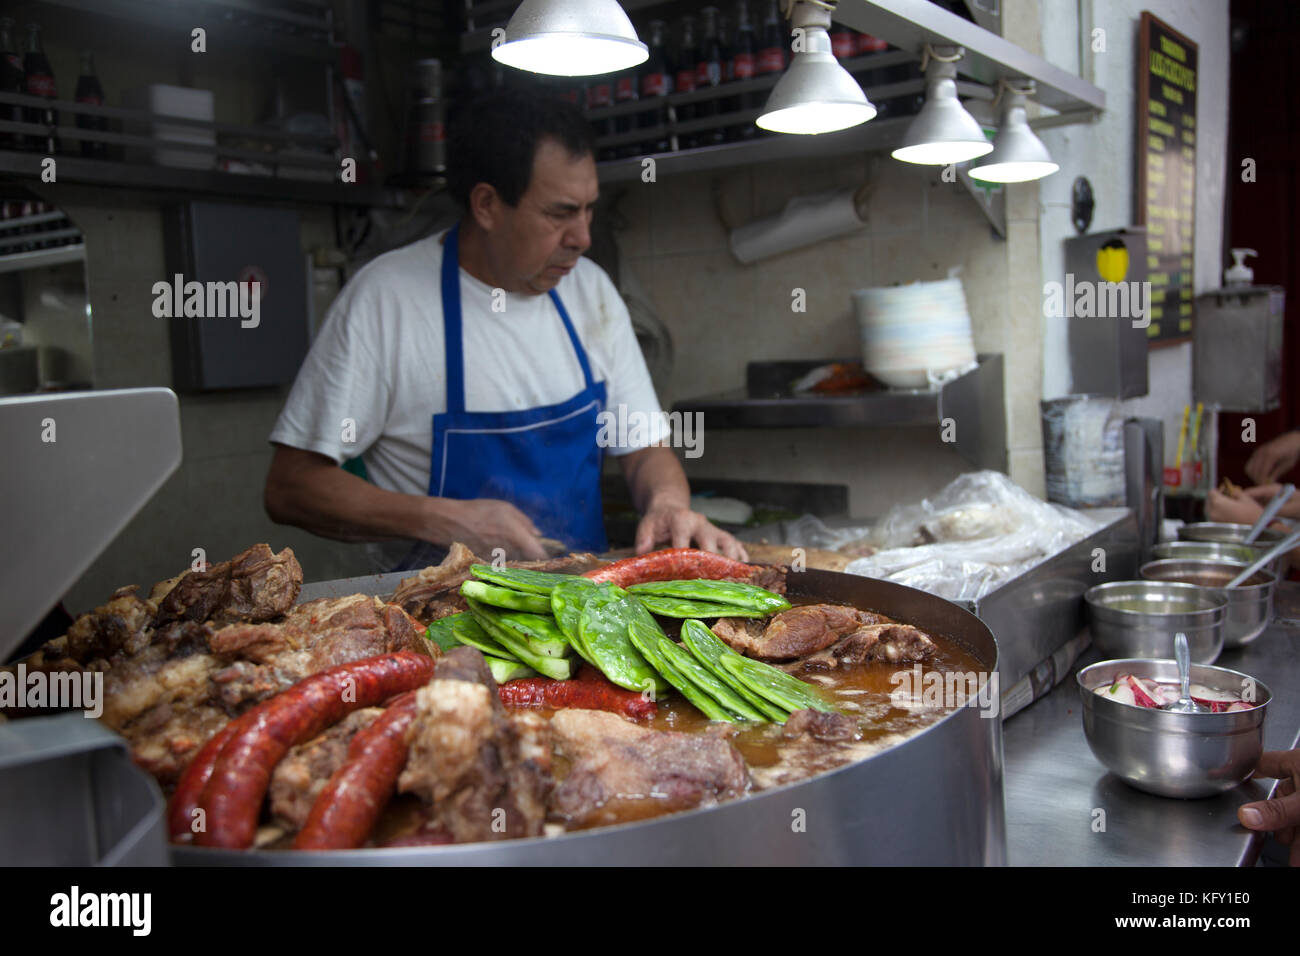 Taquería Los Cocuyos in Mexico City's Centro specializes in suadero tacos, which are different types of fats like brisket, tripe, and chorizo. Stock Photo